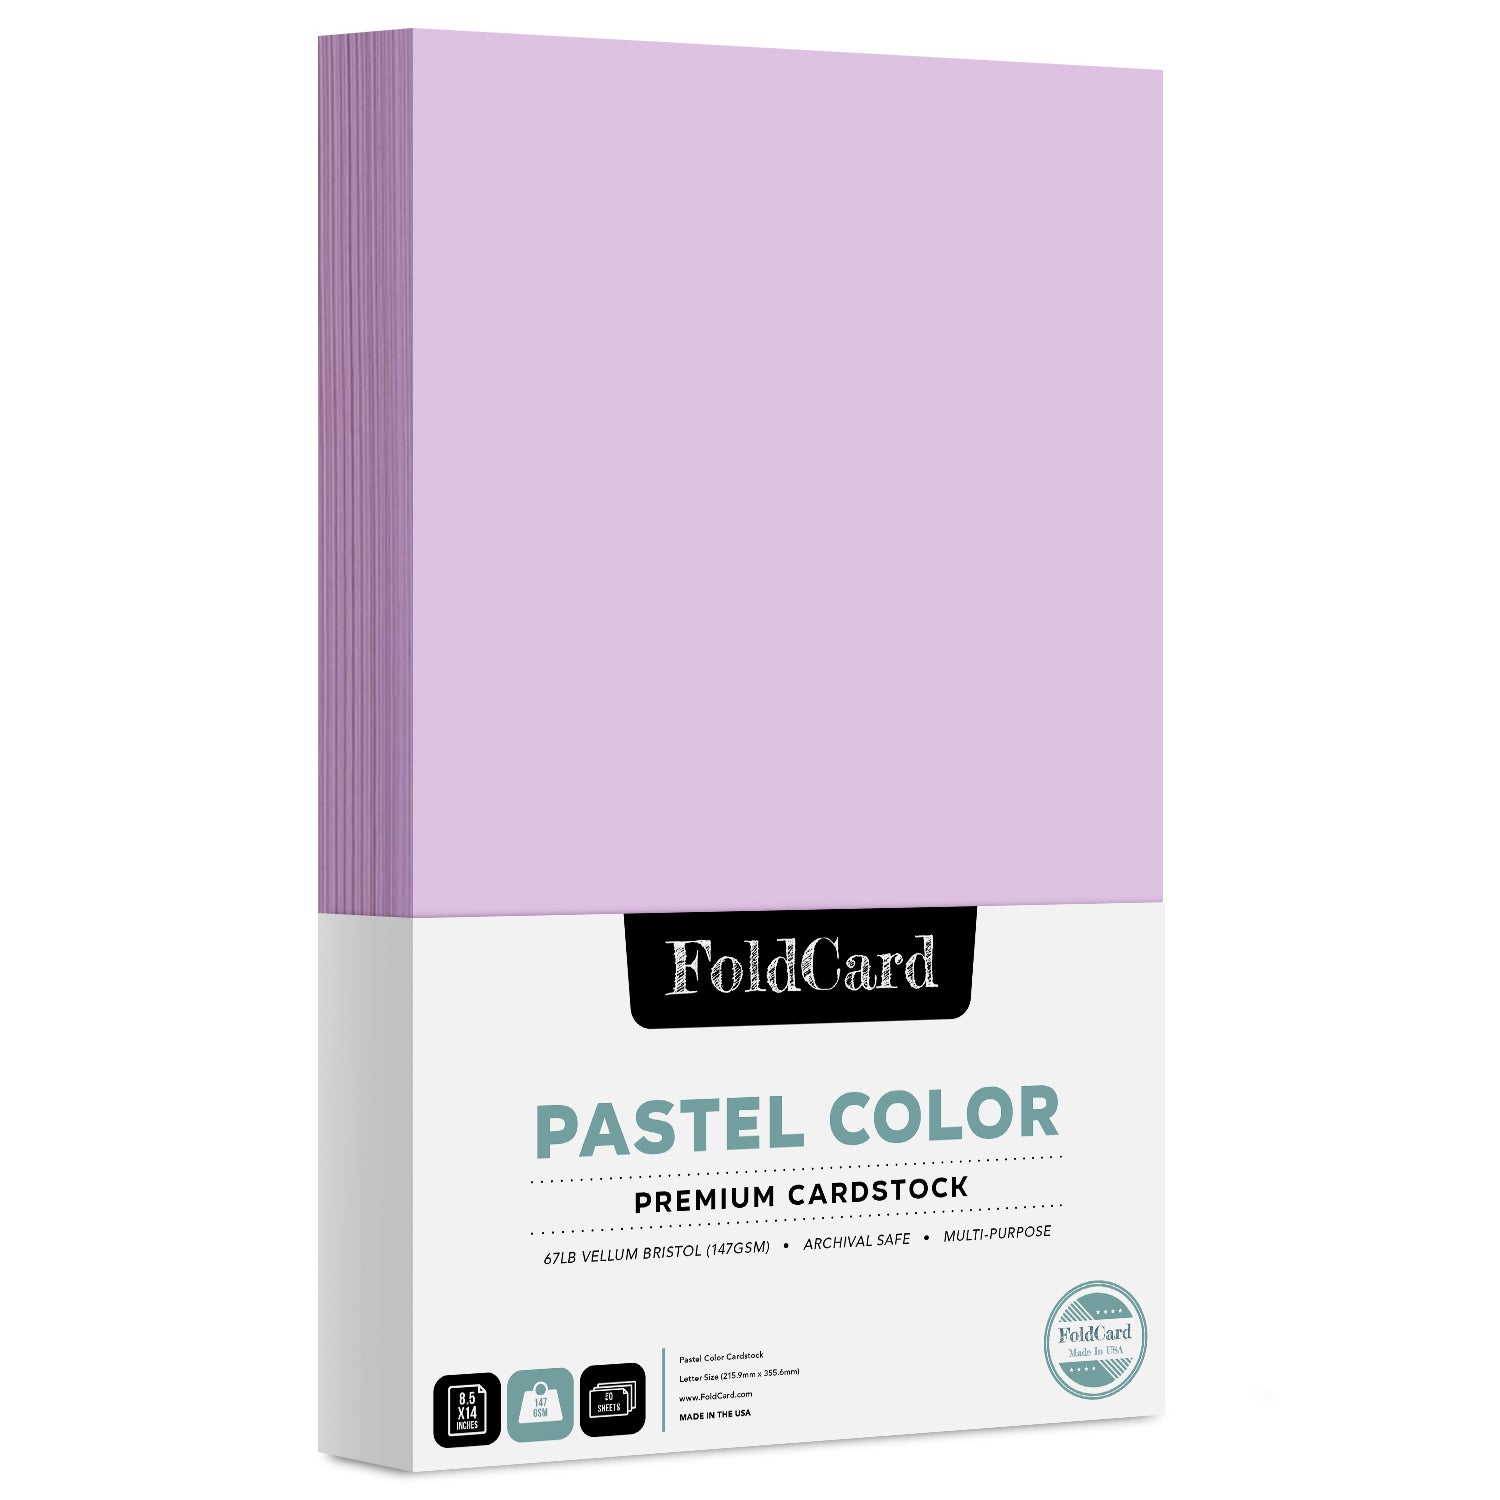 Premium Quality Pastel  Color Cardstock: 8.5 x 14 - 50 Sheets of 67lb Cover Weight